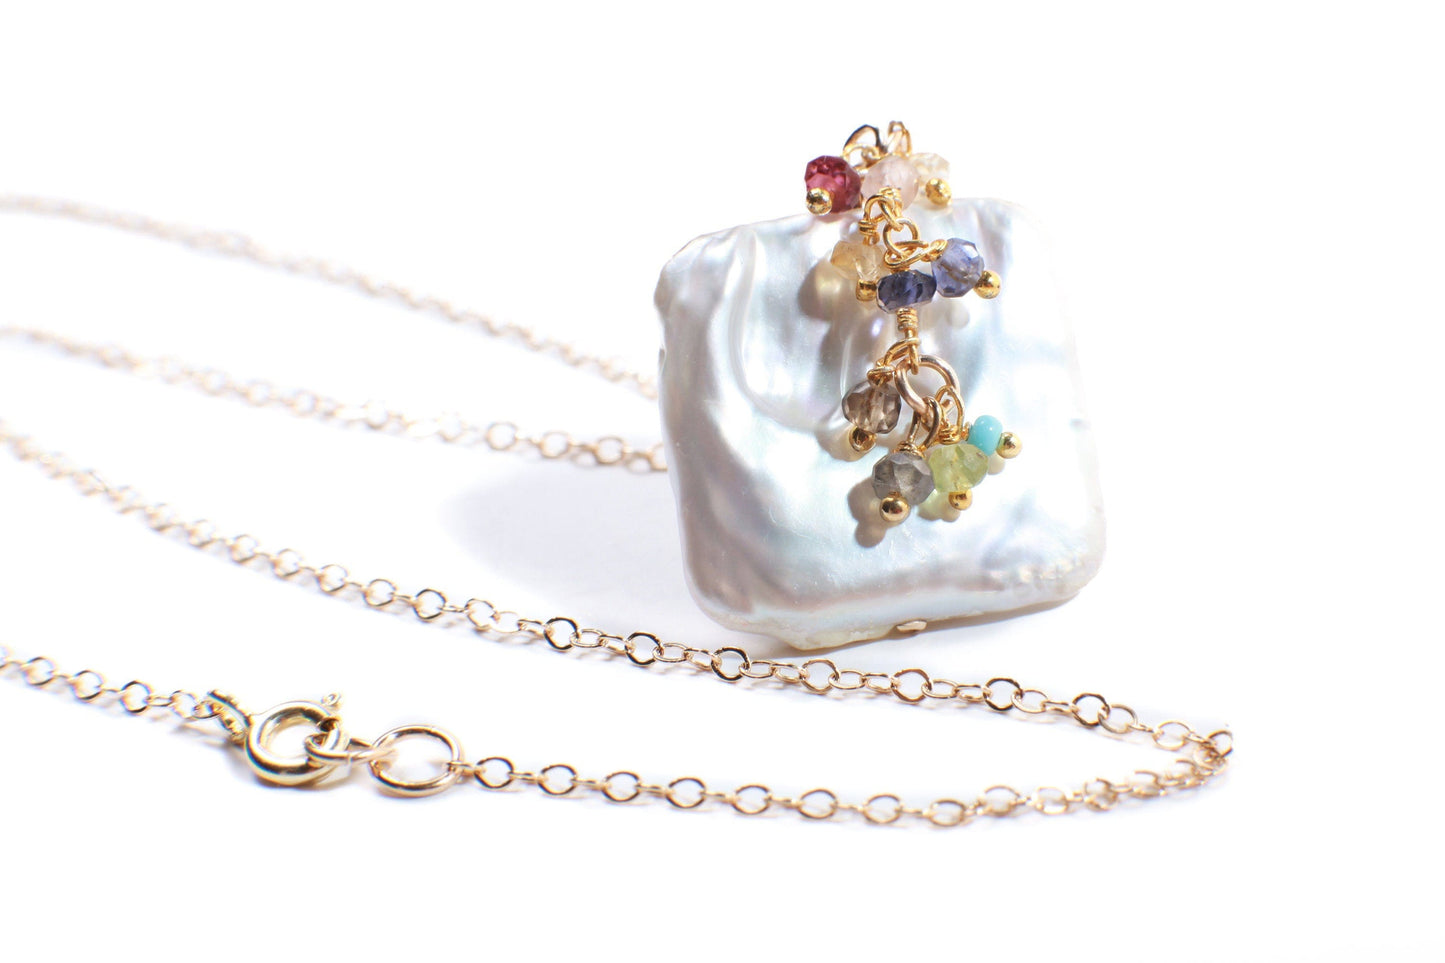 Baroque Pearl Necklace, Freshwater Square Baroque, Multi Gemstone Clusters, Iolite, Garnet, Peridot, Labradorite in 14K Gold Filled Necklace